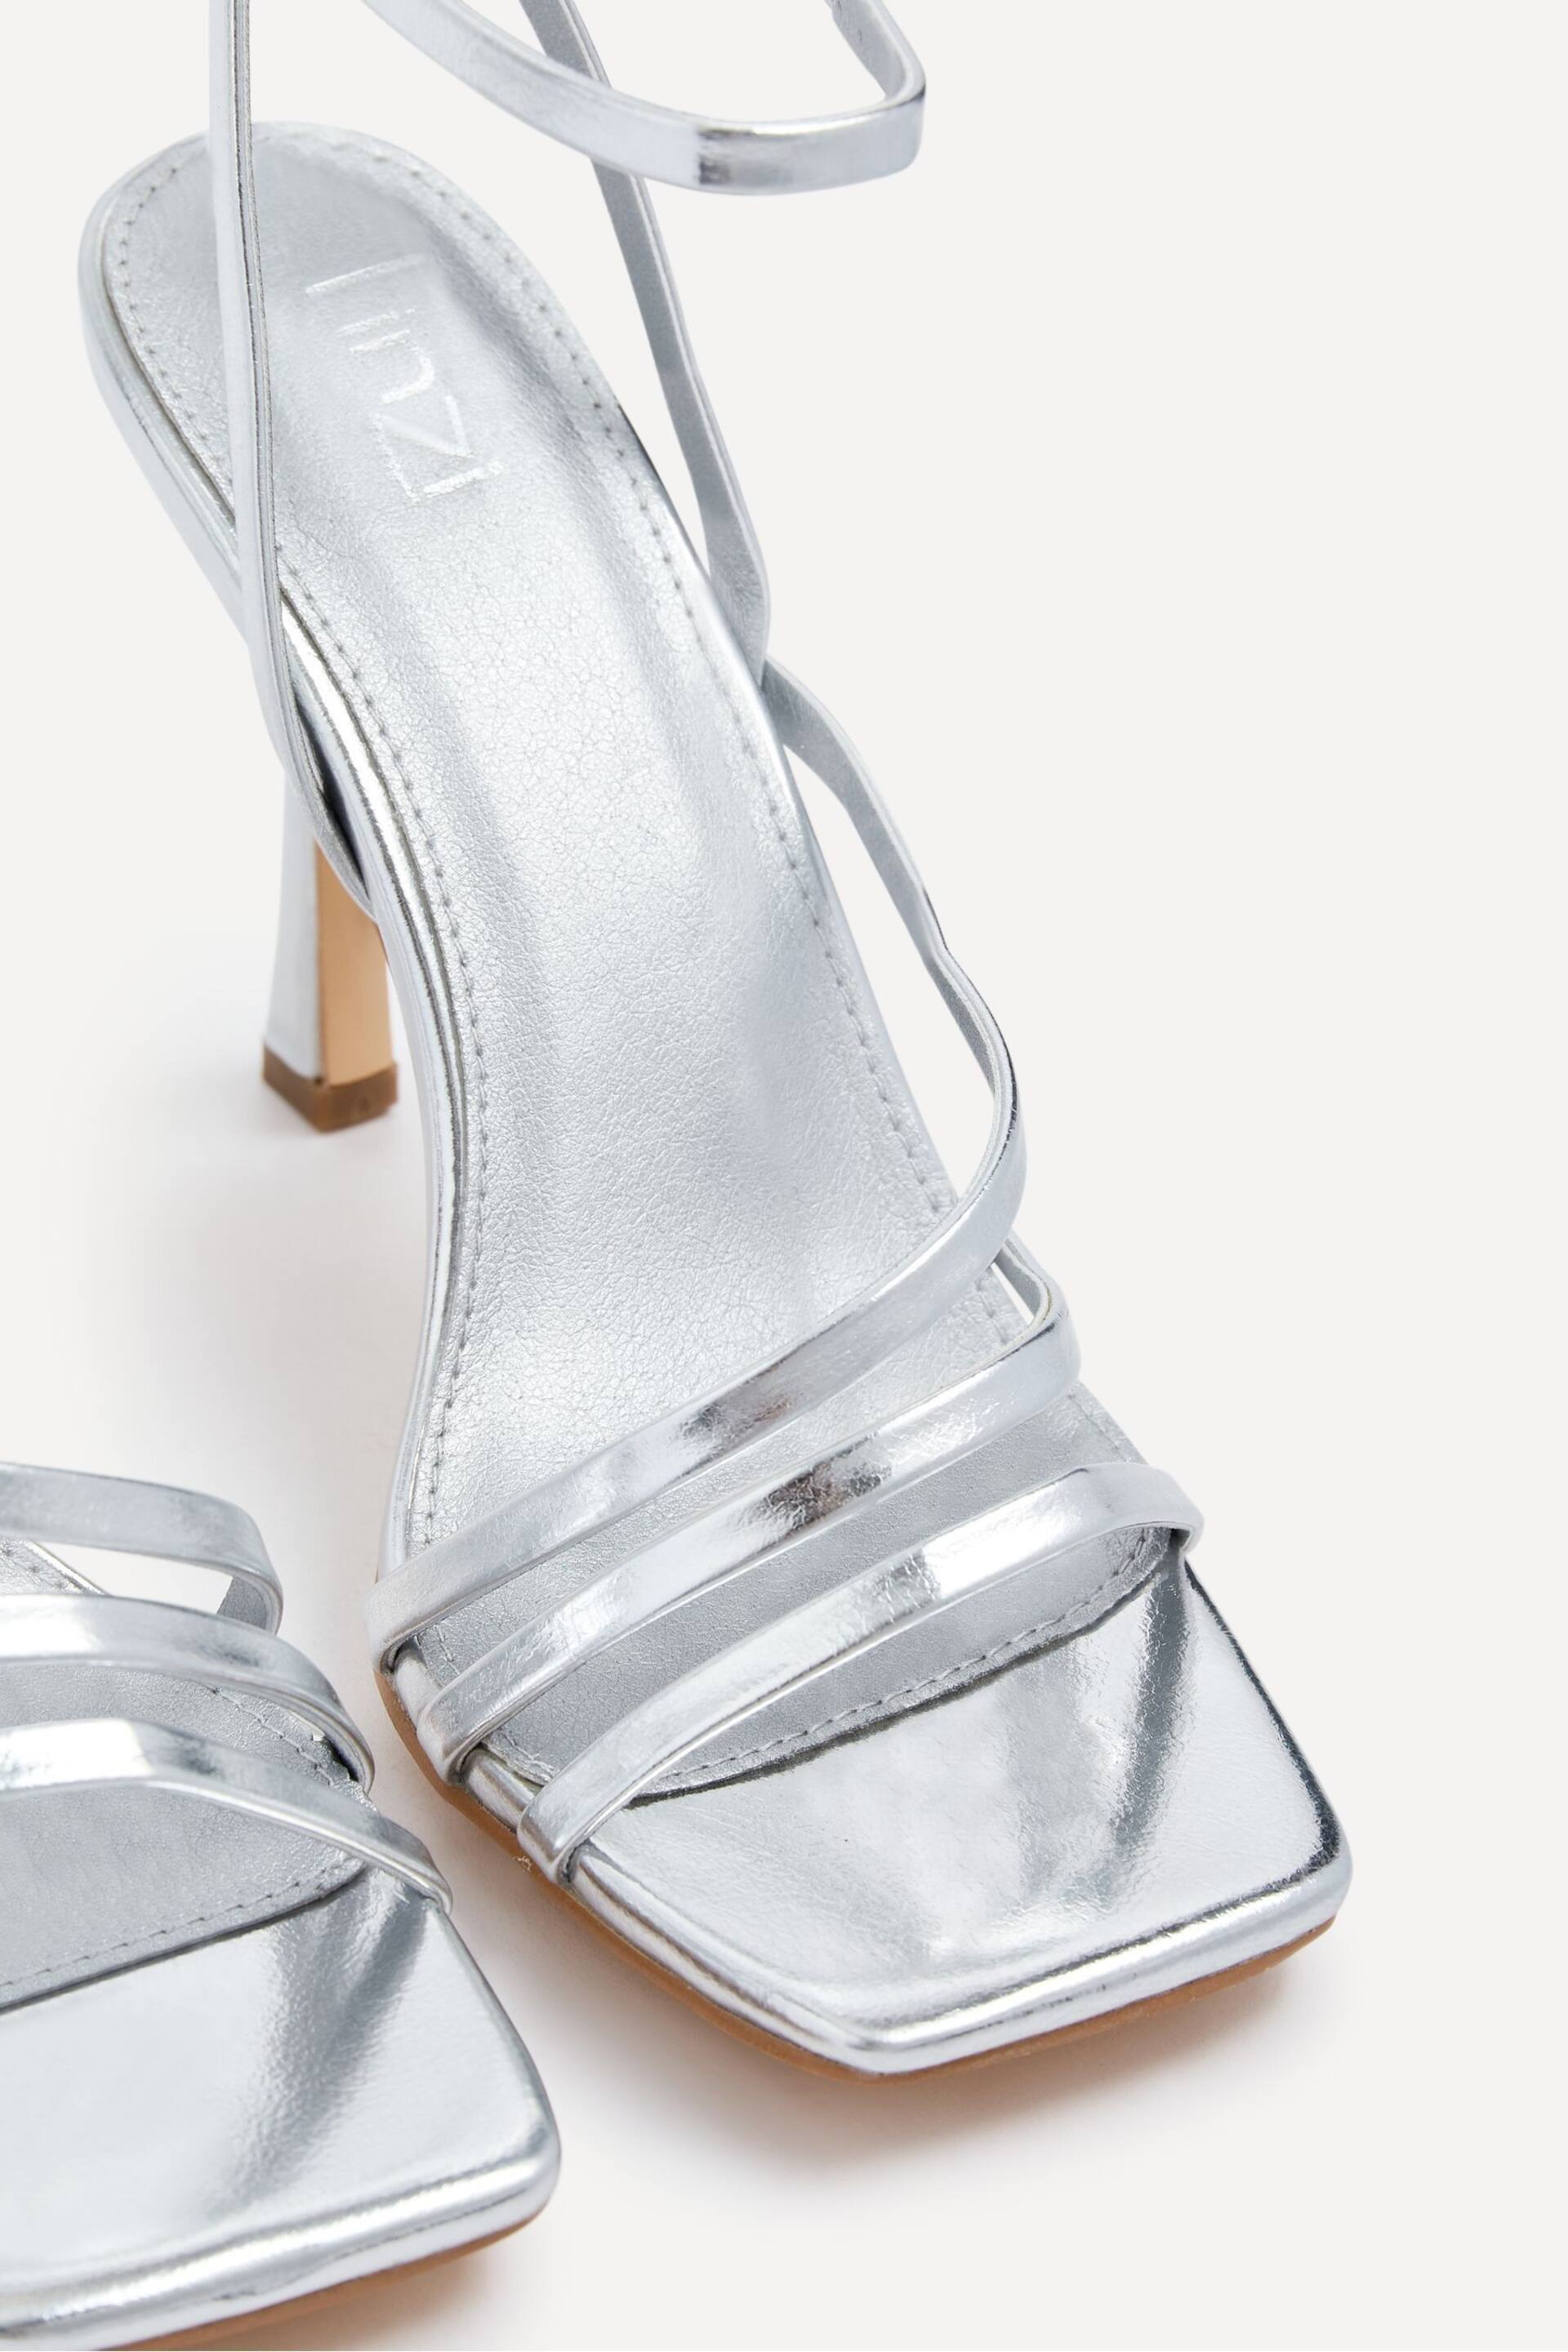 Linzi Silver Scarlett Strappy Heel Sandals With Ankle Strap - Image 4 of 5